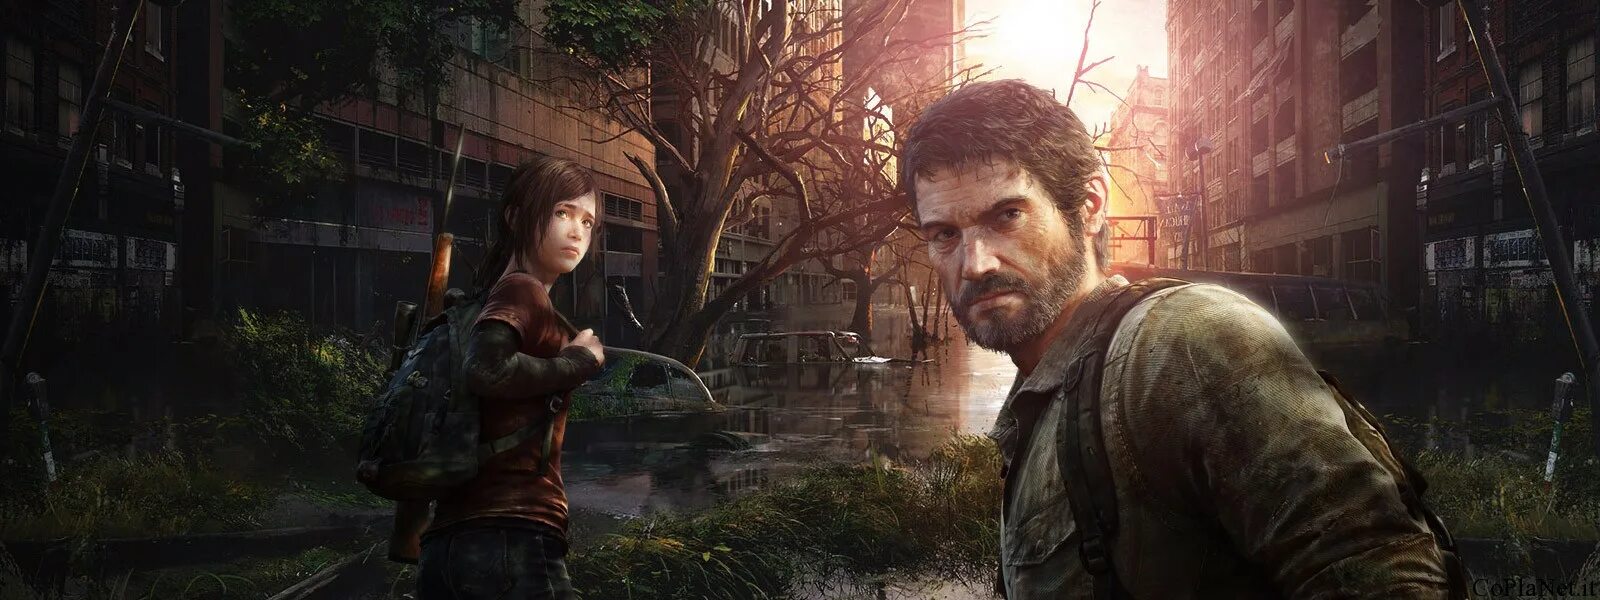 Зе ласт оф ас 2013. The last of us. The last of us игра. The last of us 2013.